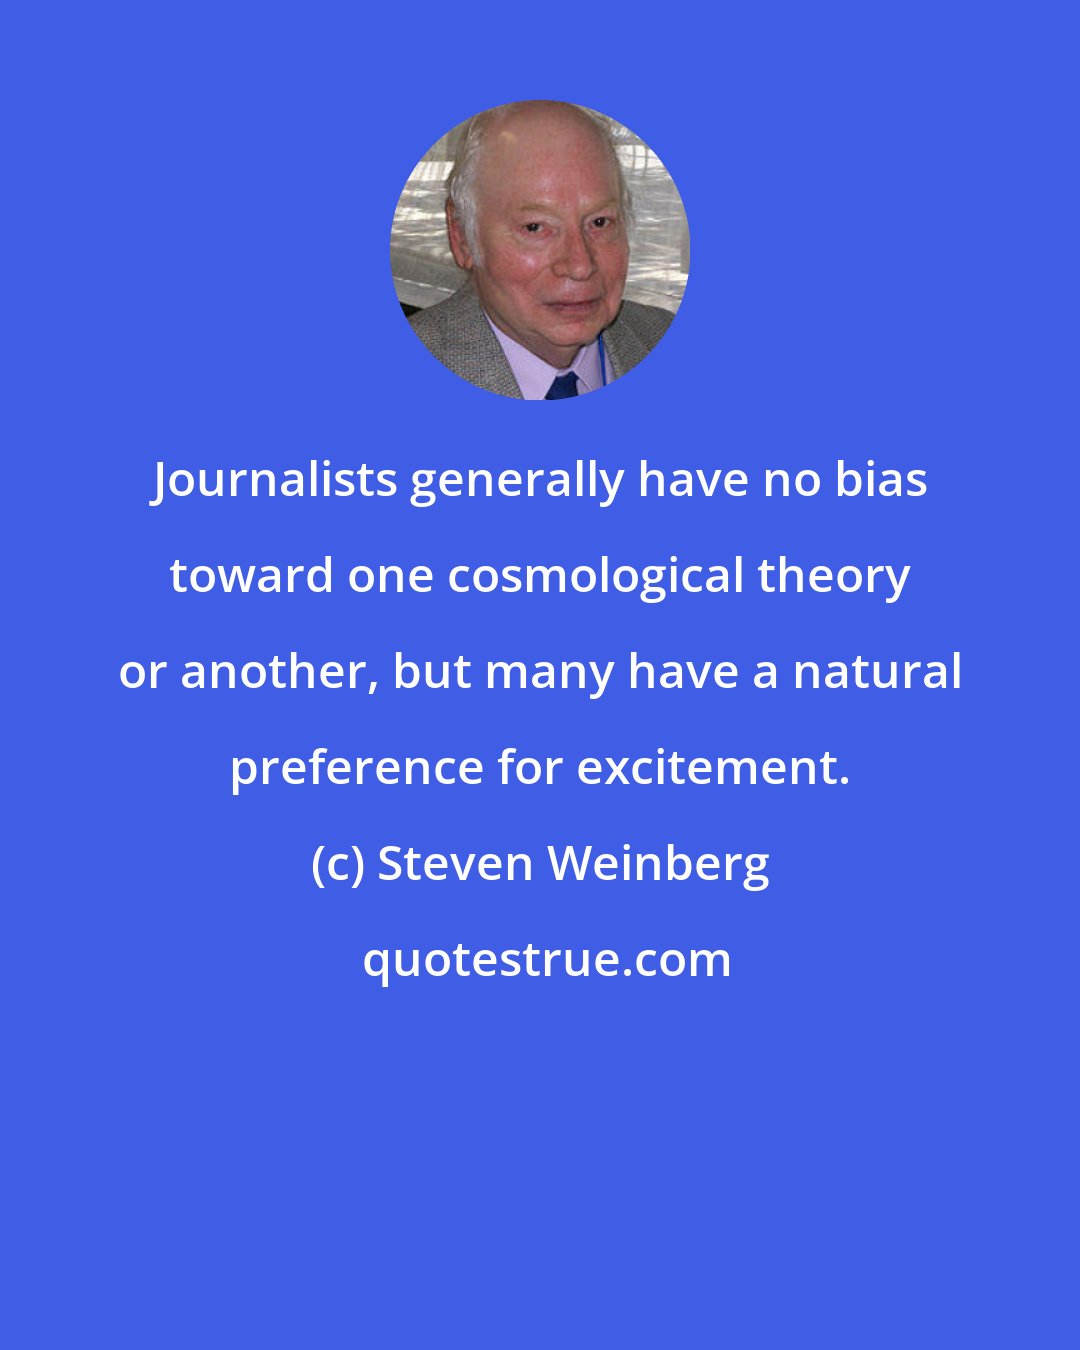 Steven Weinberg: Journalists generally have no bias toward one cosmological theory or another, but many have a natural preference for excitement.